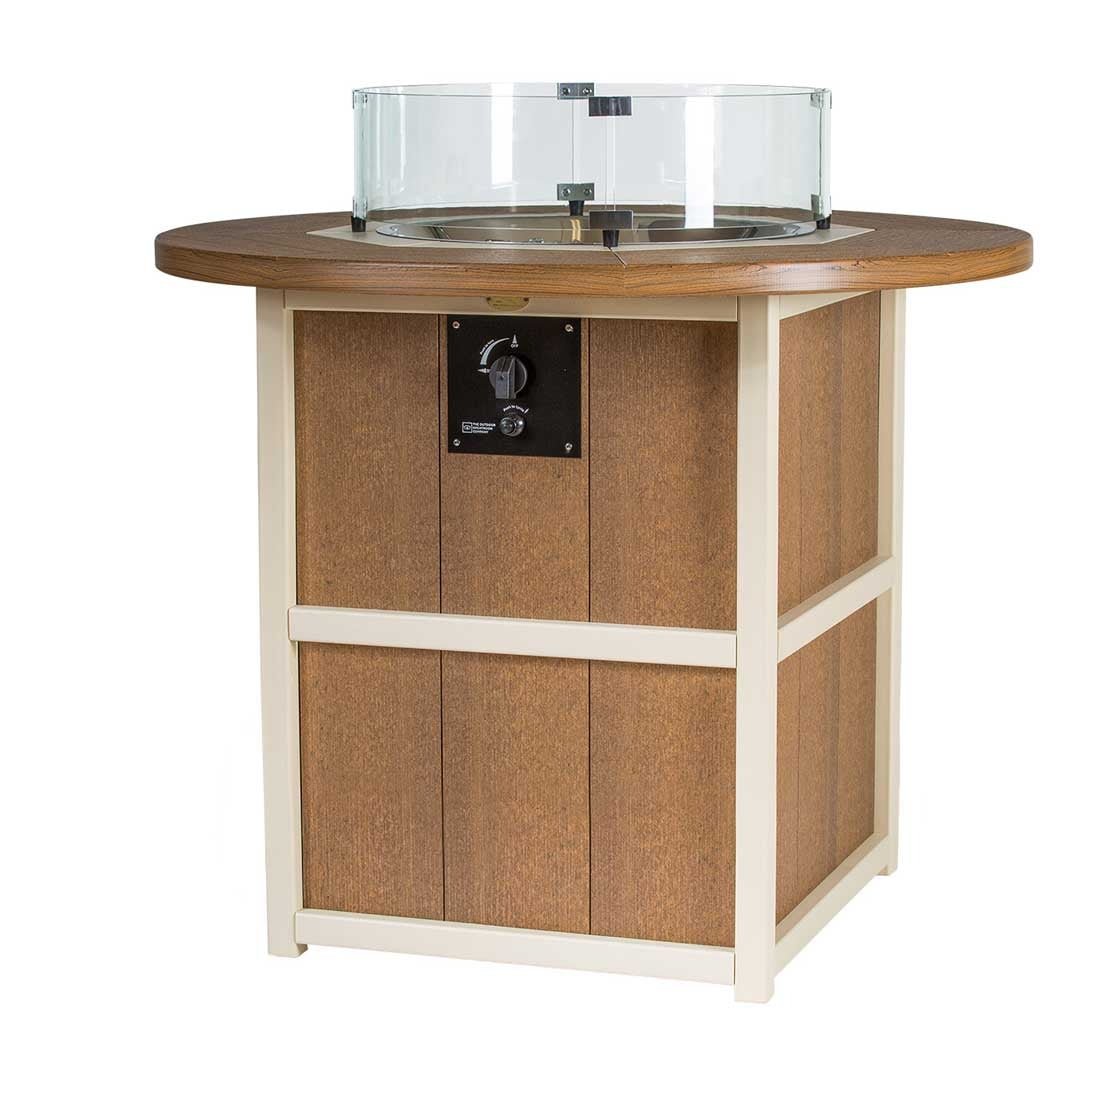 Summerside Round Fire Counter Table - snyders.furniture